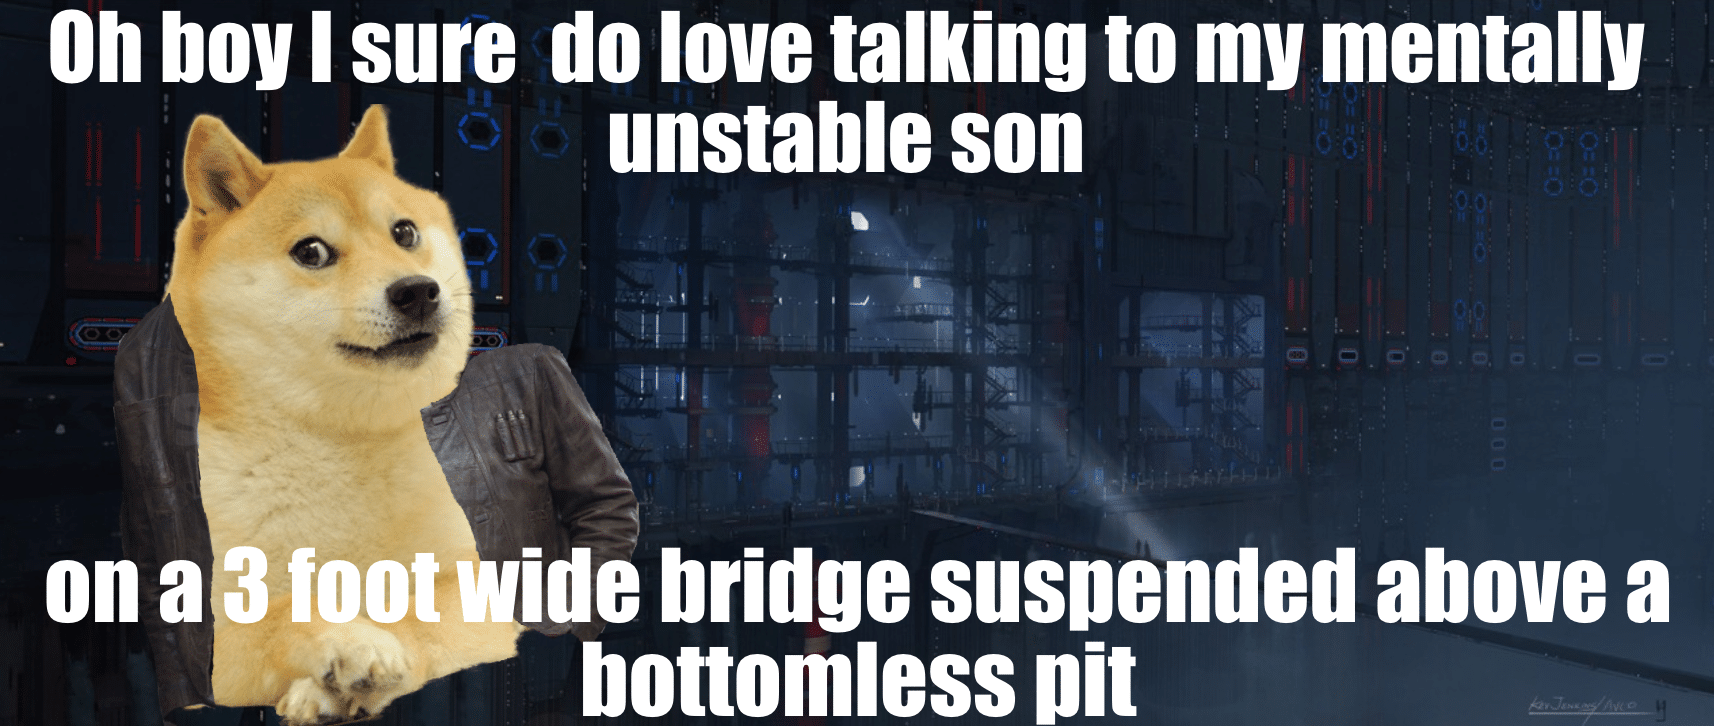 Sequel-memes, Star Wars, Kyl Star Wars Memes Sequel-memes, Star Wars, Kyl text: Oh boy I sure do love talking to my mentally ona foot unstable son ide bridge suspended above a bottomless Dit 